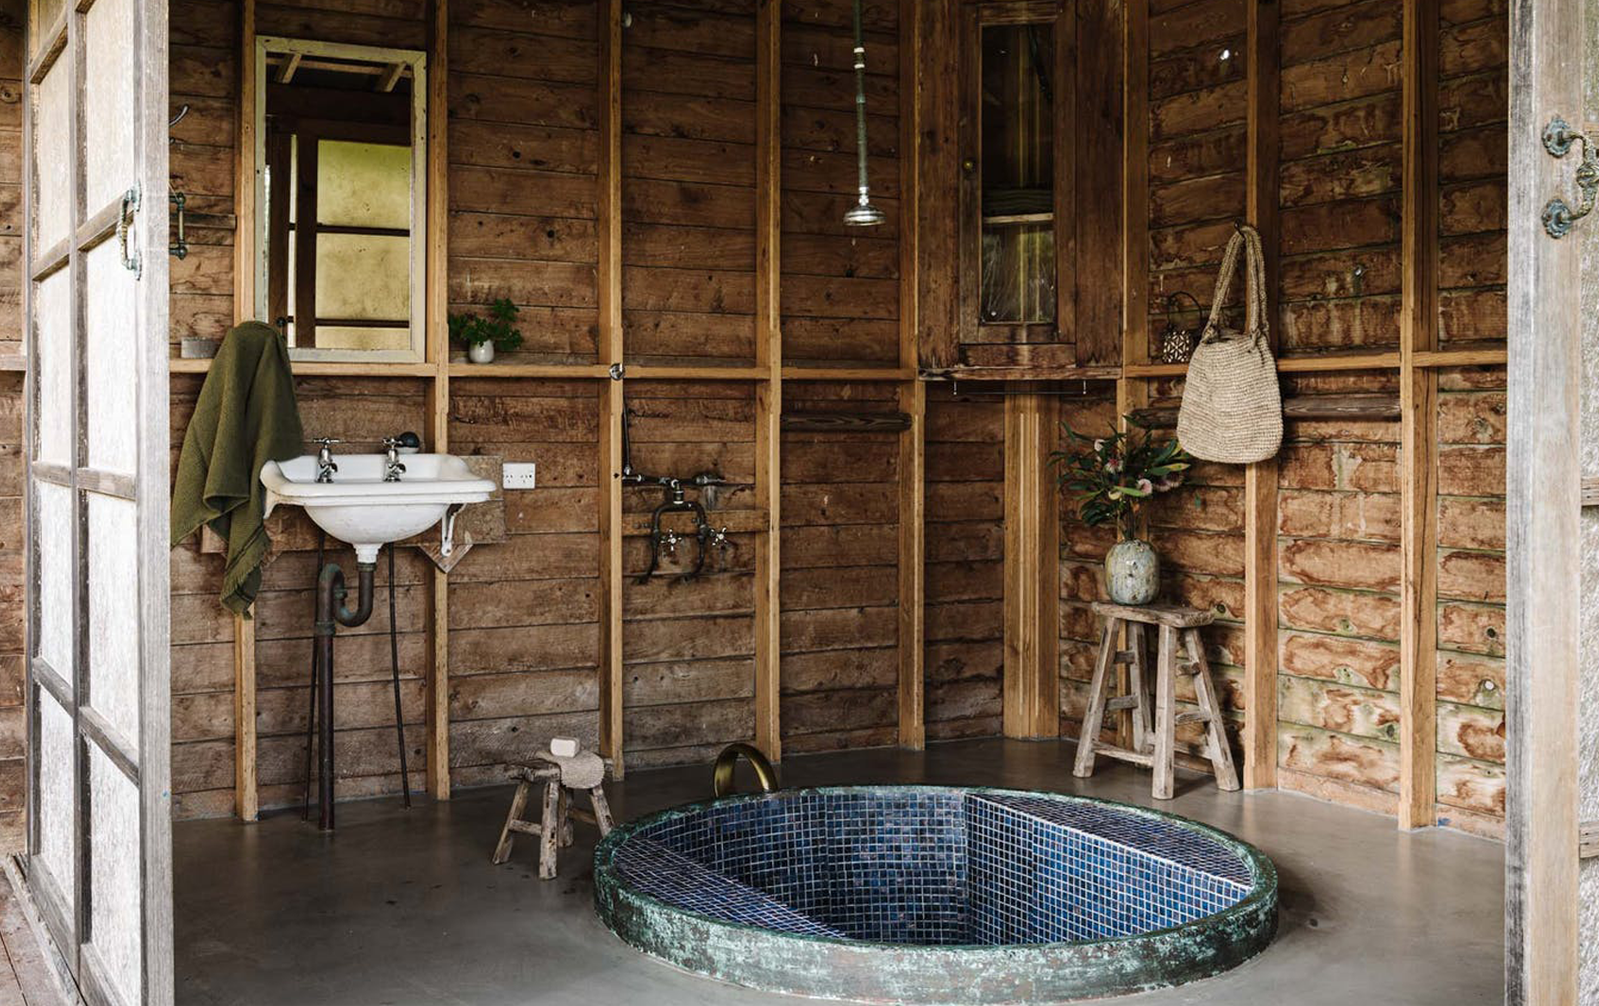 An outdoor spa room at one of the best airbnbs in Victoria.